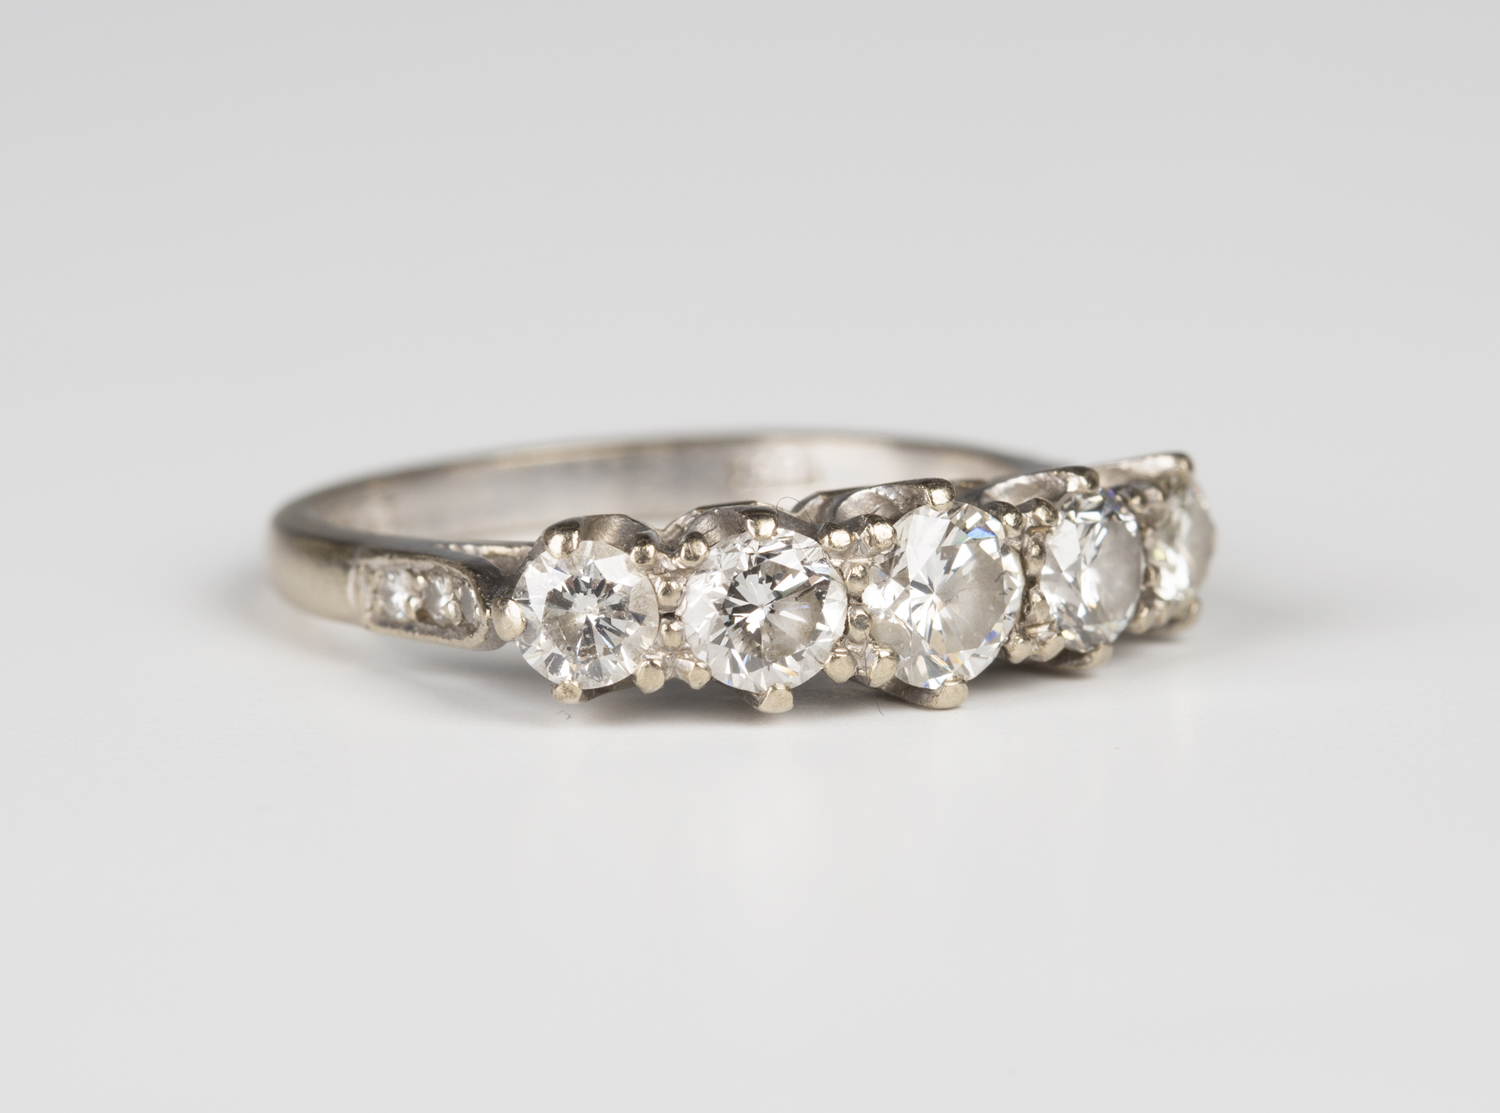 A white gold and diamond five stone ring, claw set with a row of circular cut diamonds graduating in